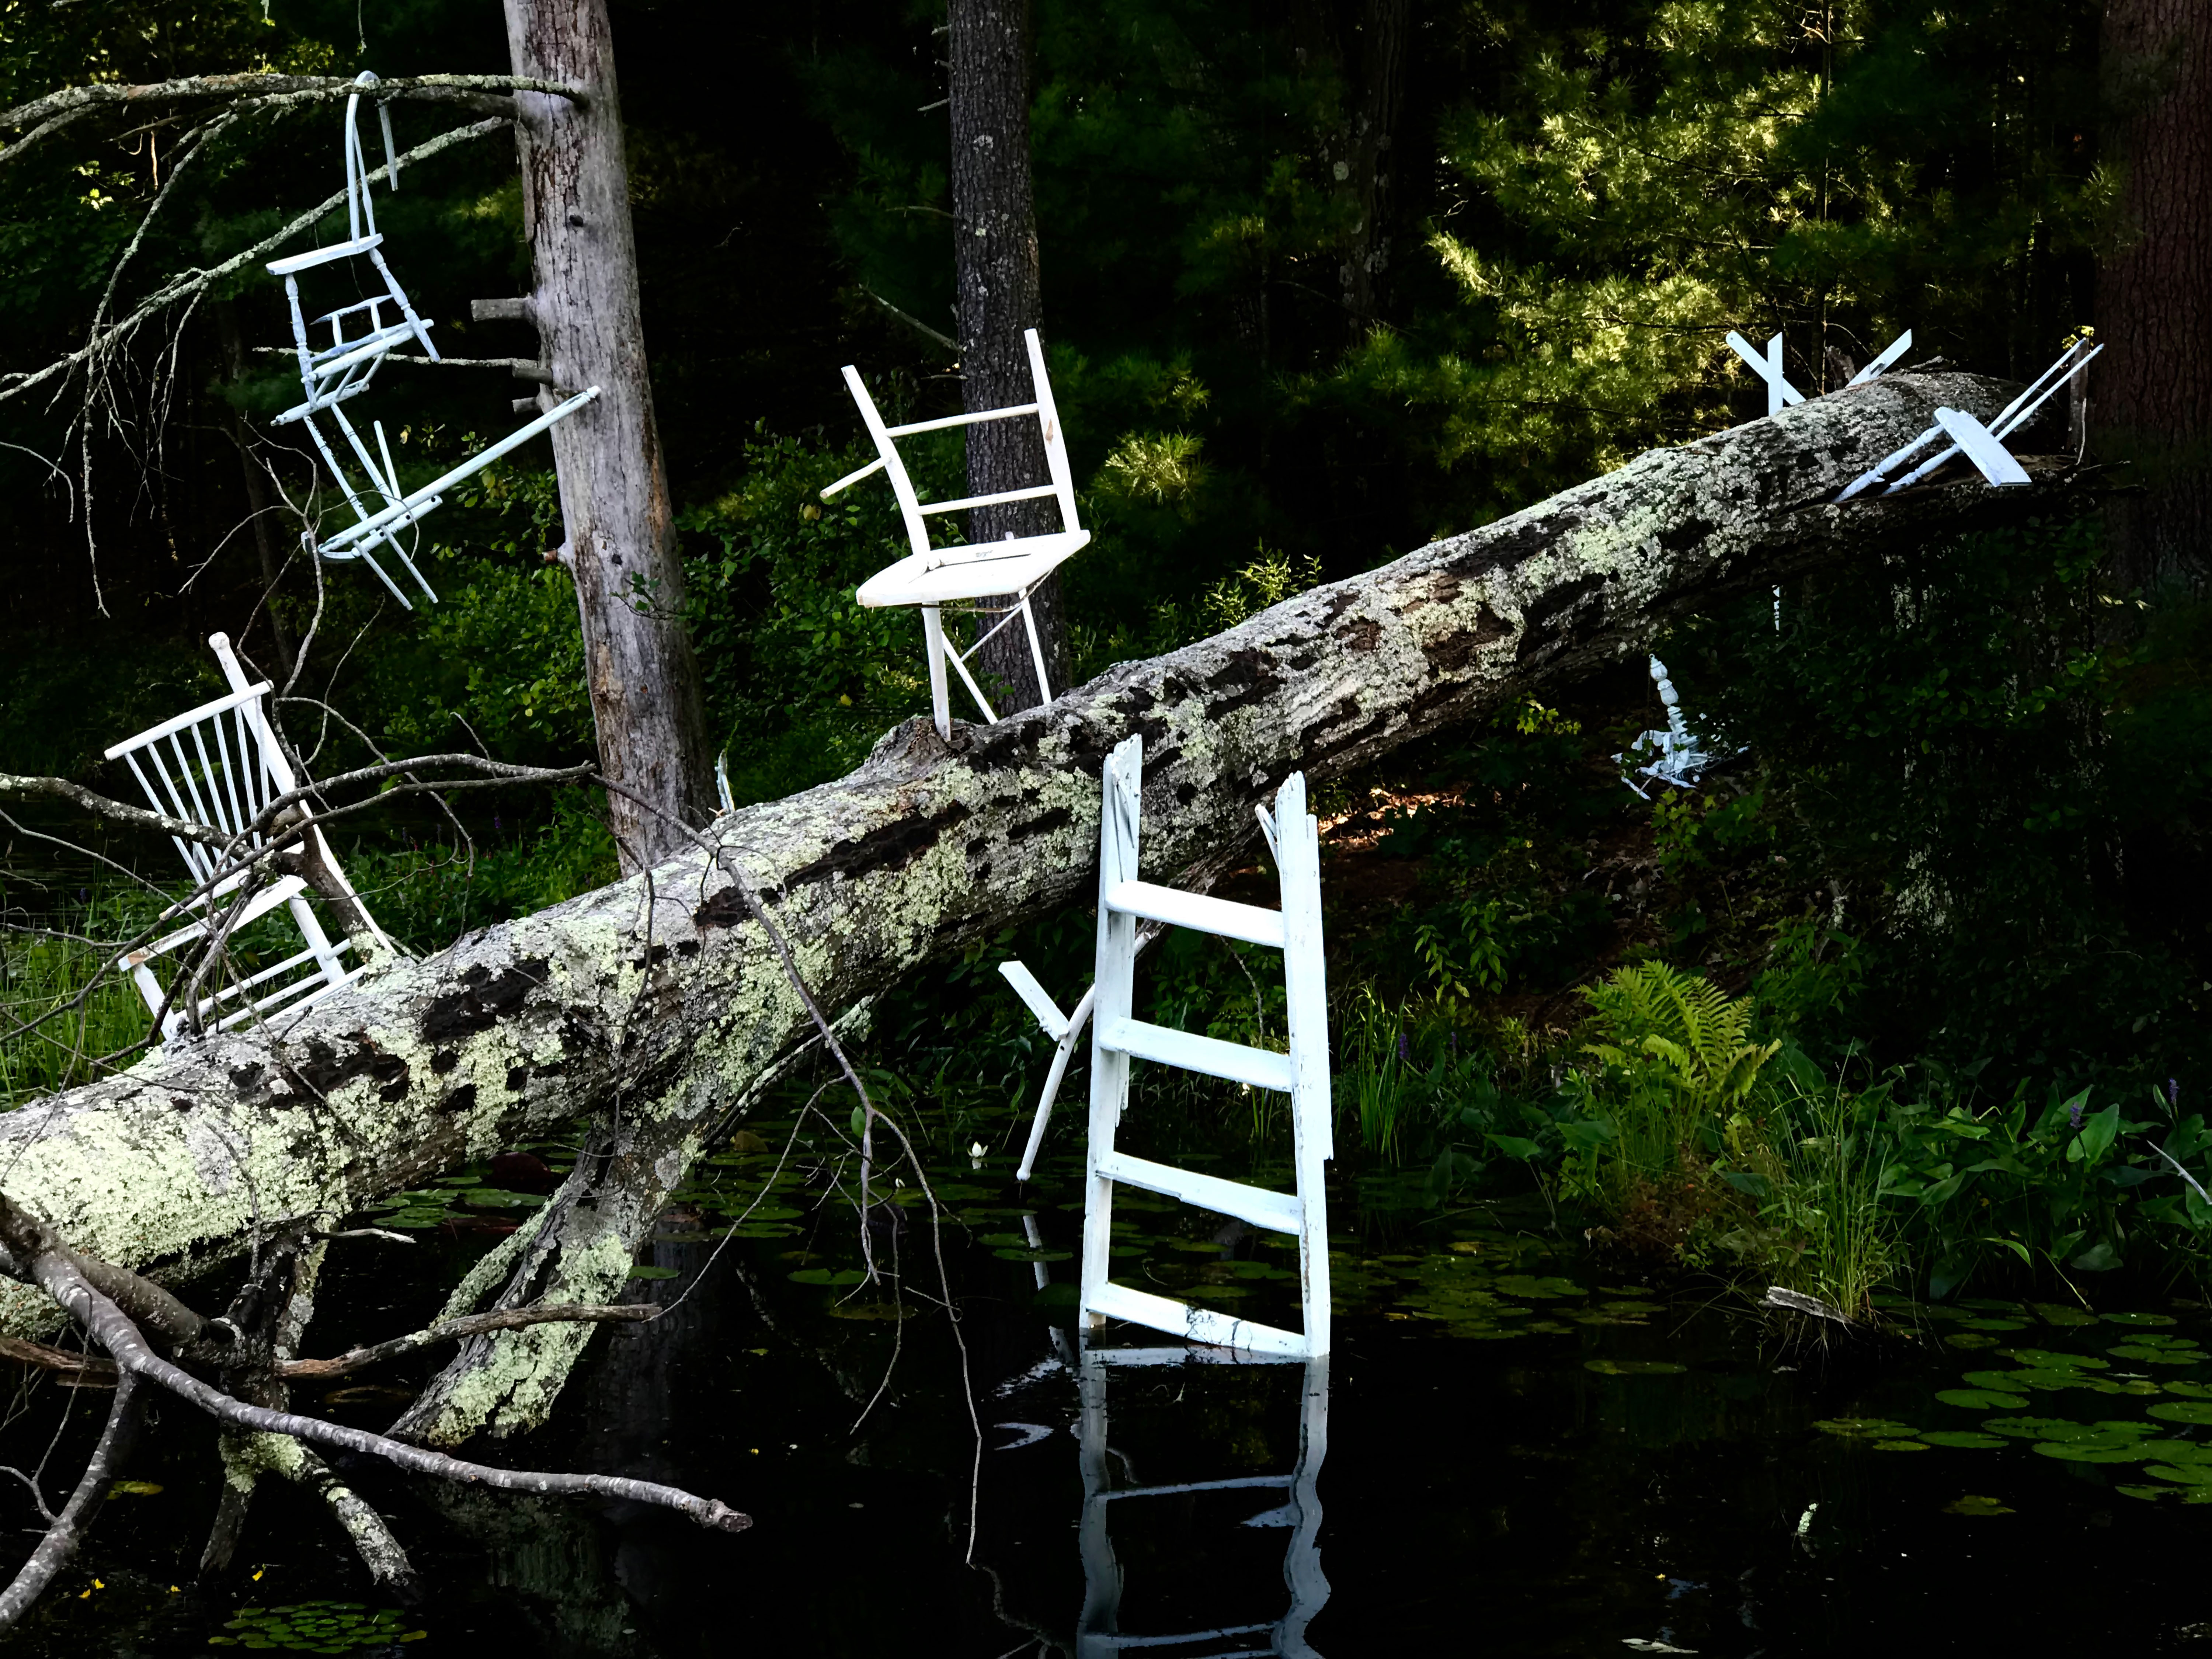 Photograph detail of 'Metamorphic Reflections' installation by artist Caroline Coolidge. Captures the fallen tree trunk cutting across the frame from the lower left to the upper right. At the center of the image, a white ladder is attached to the middle of the tree trunk, descending into the dark water.